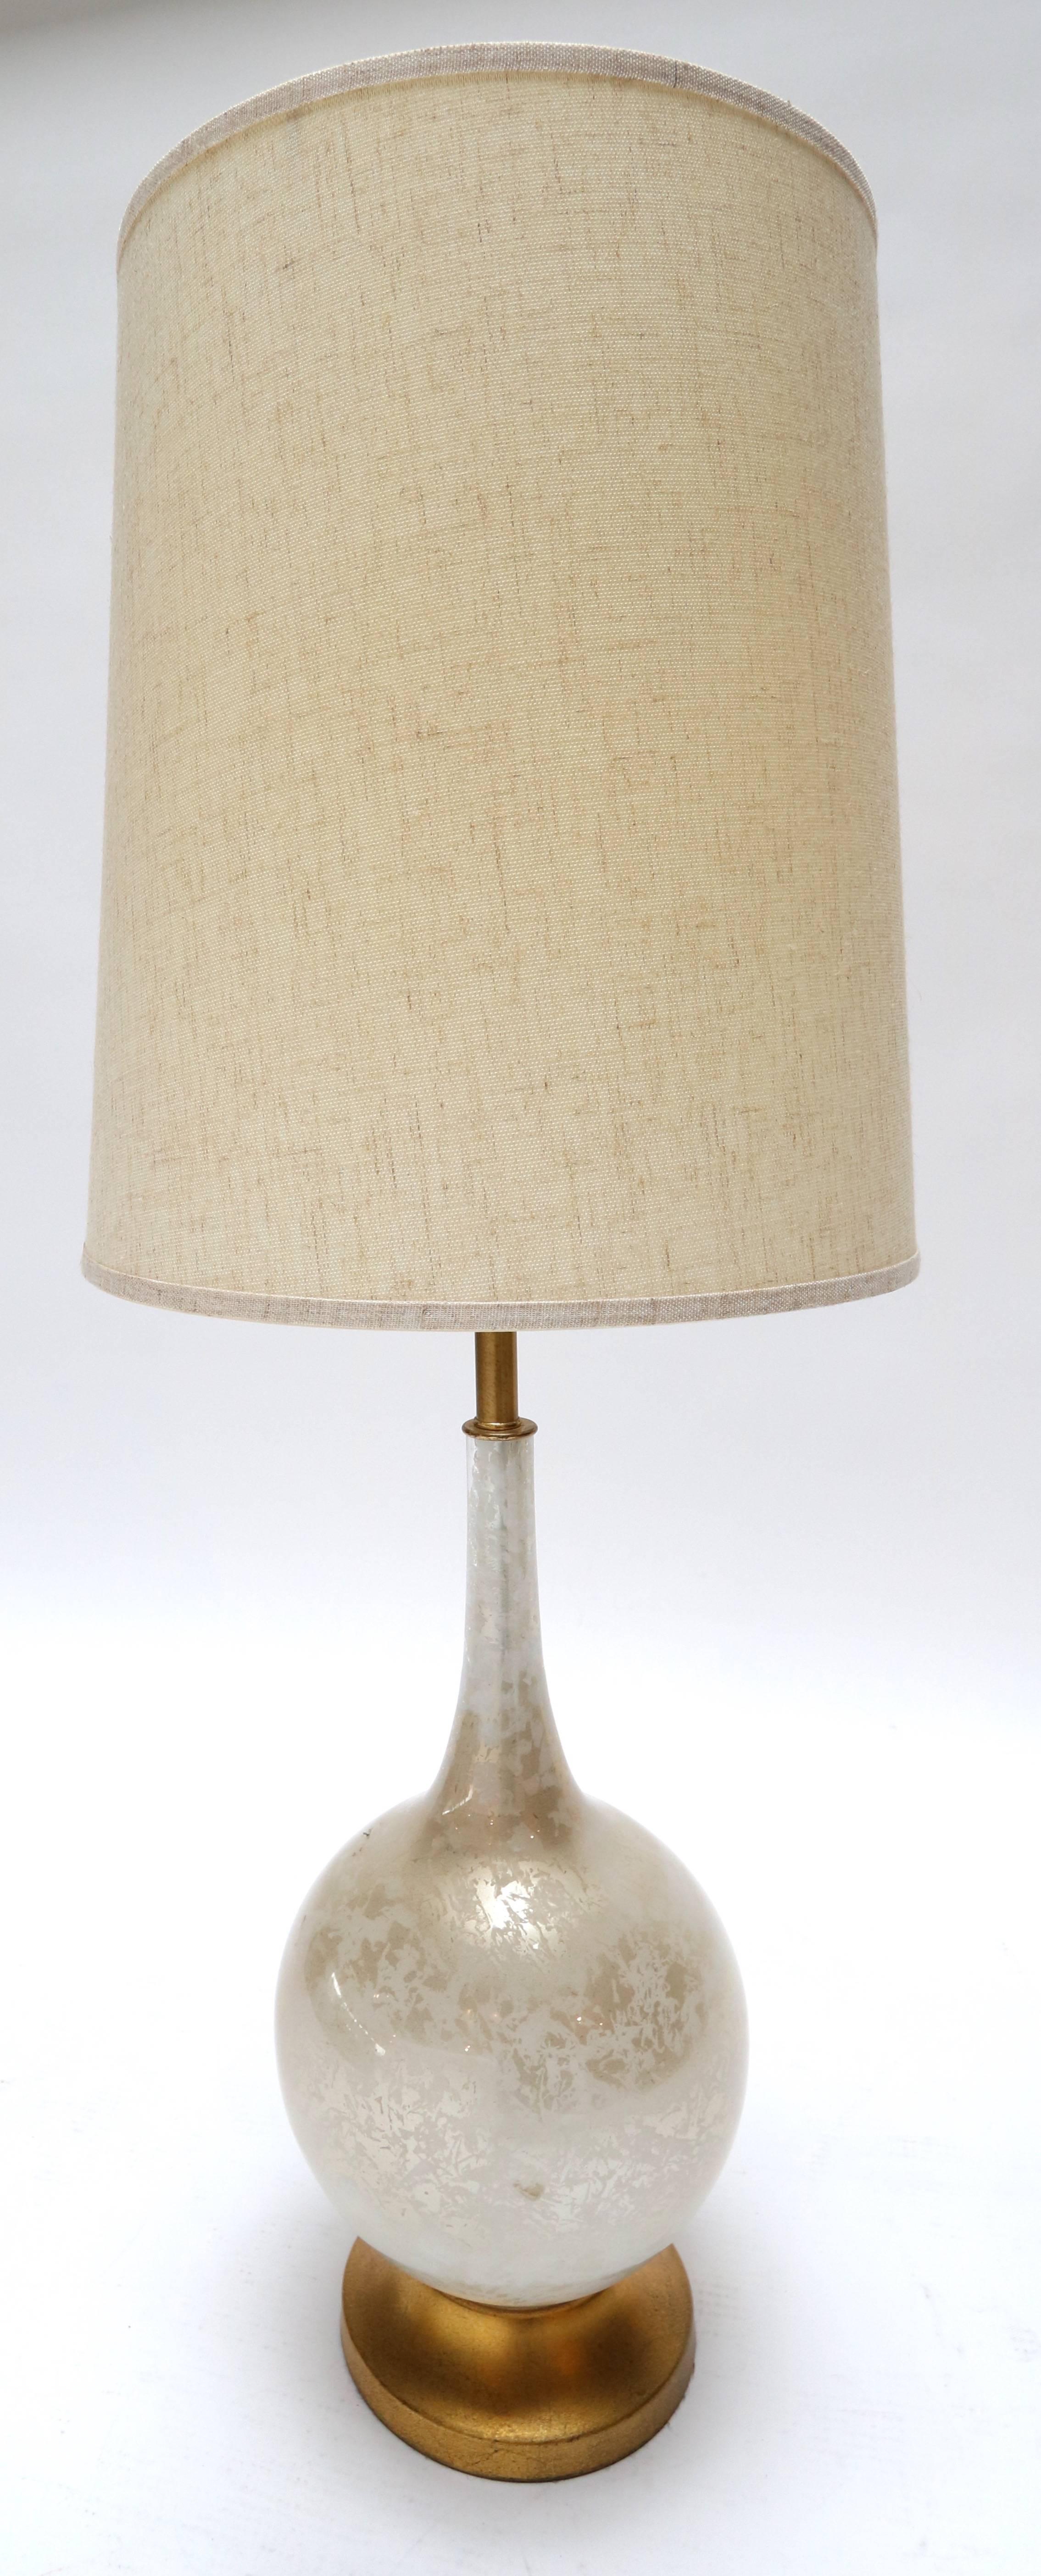 Pair of 1960s Murano white glass table lamps with brass base and beige linen shade.